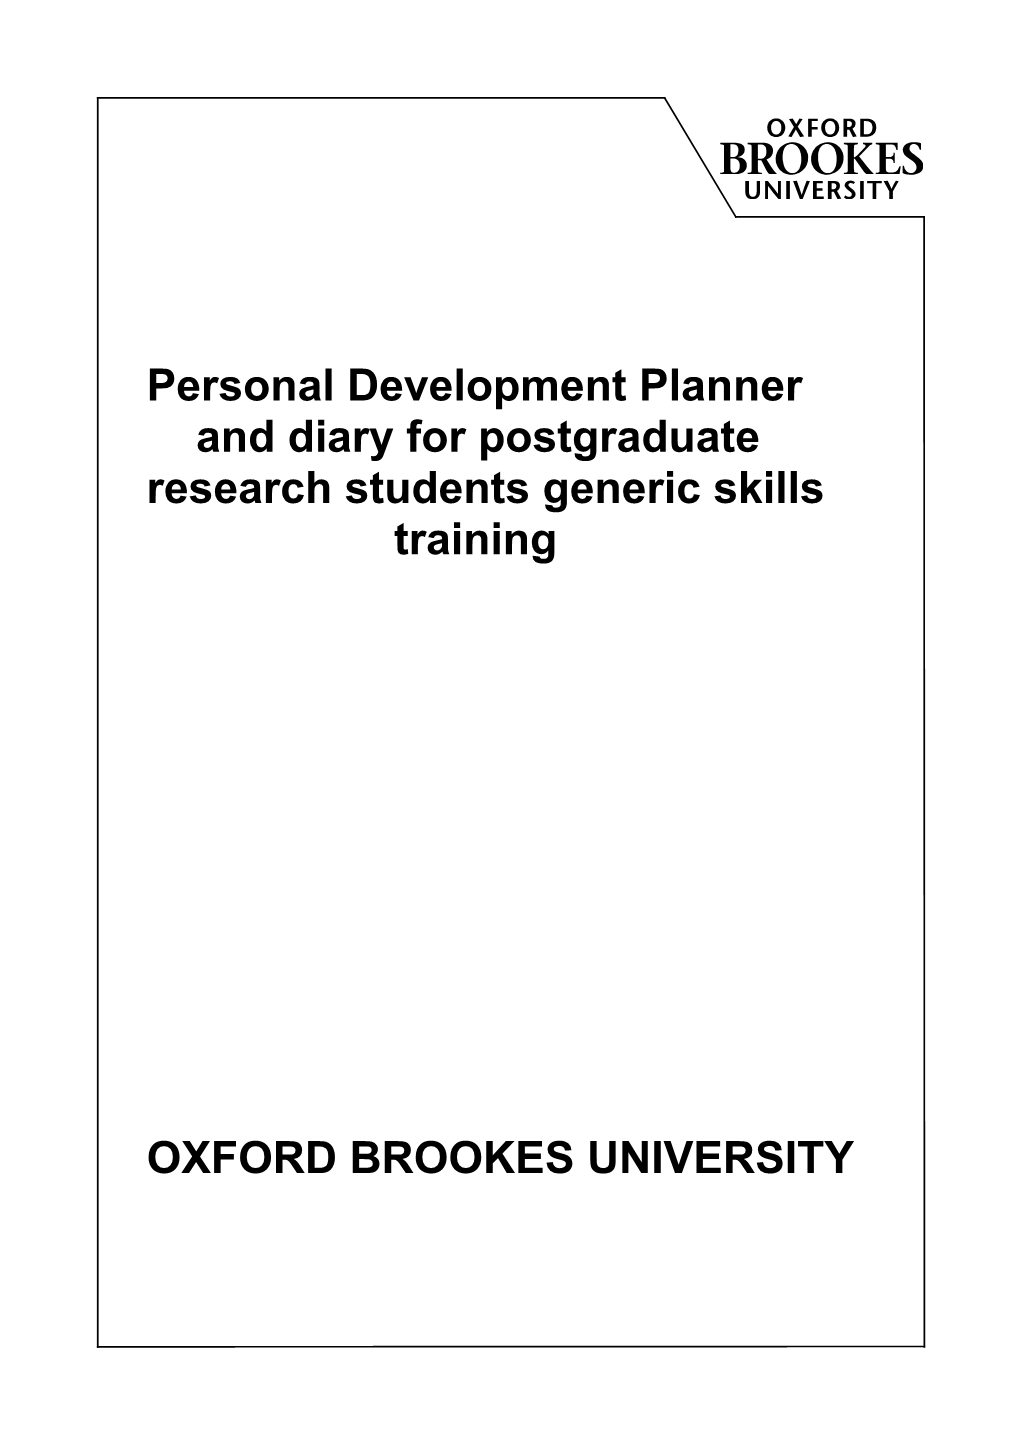 Training Planner and Diary for Postgraduate Research Students Generic Skills Training